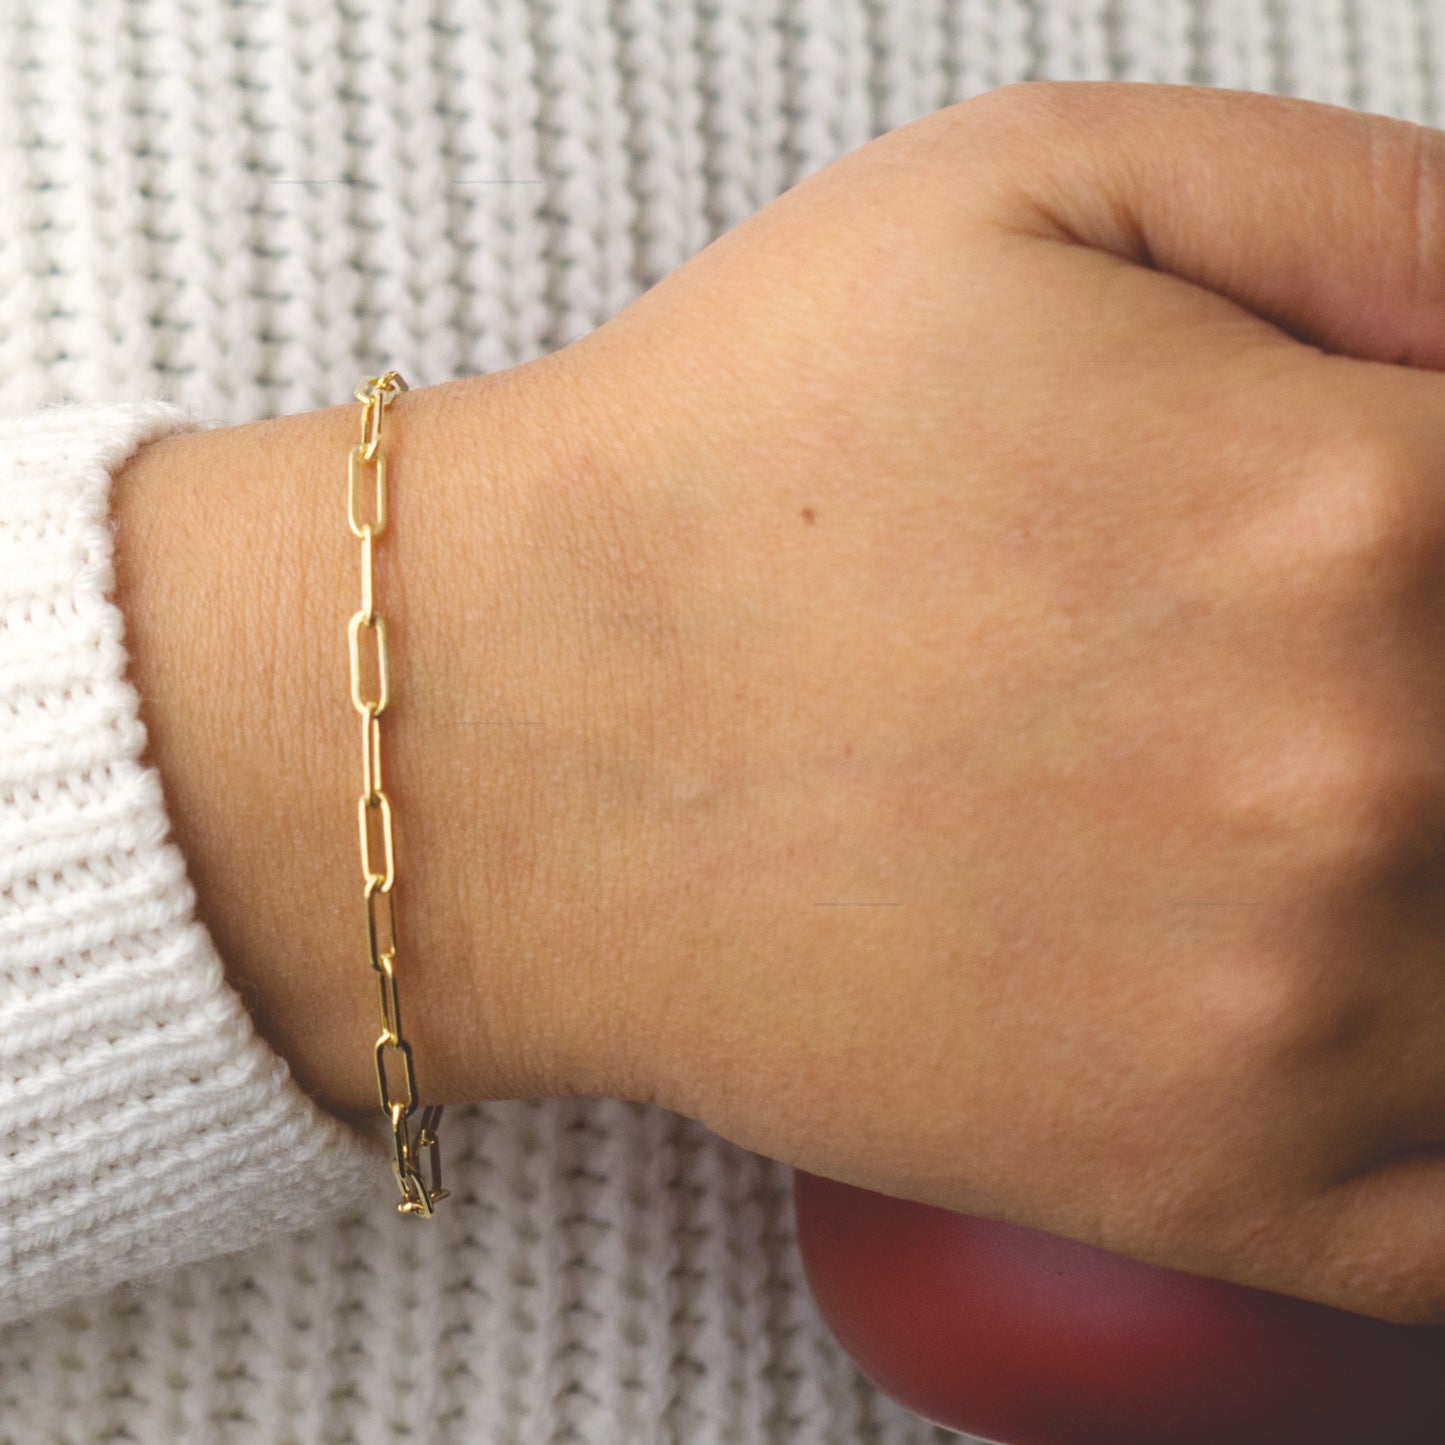 Woman wearing a 14K gold fill paperclip chain bracelet with a classic style (large) link size